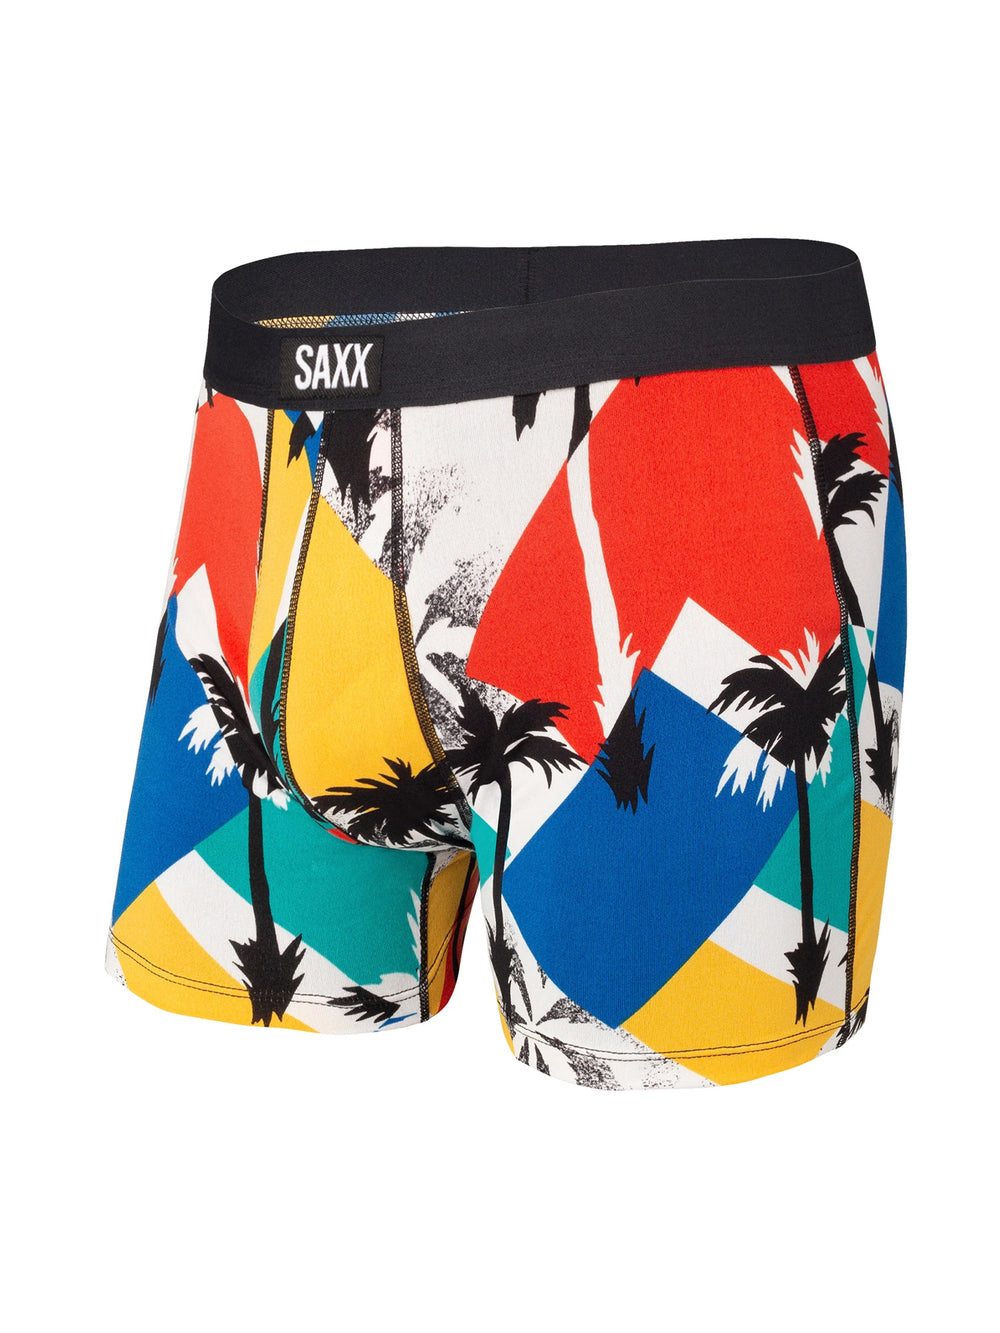 SAXX DAY TRIPPER BOXER BRIEFING - MIAMI NICE - CLEARANCE